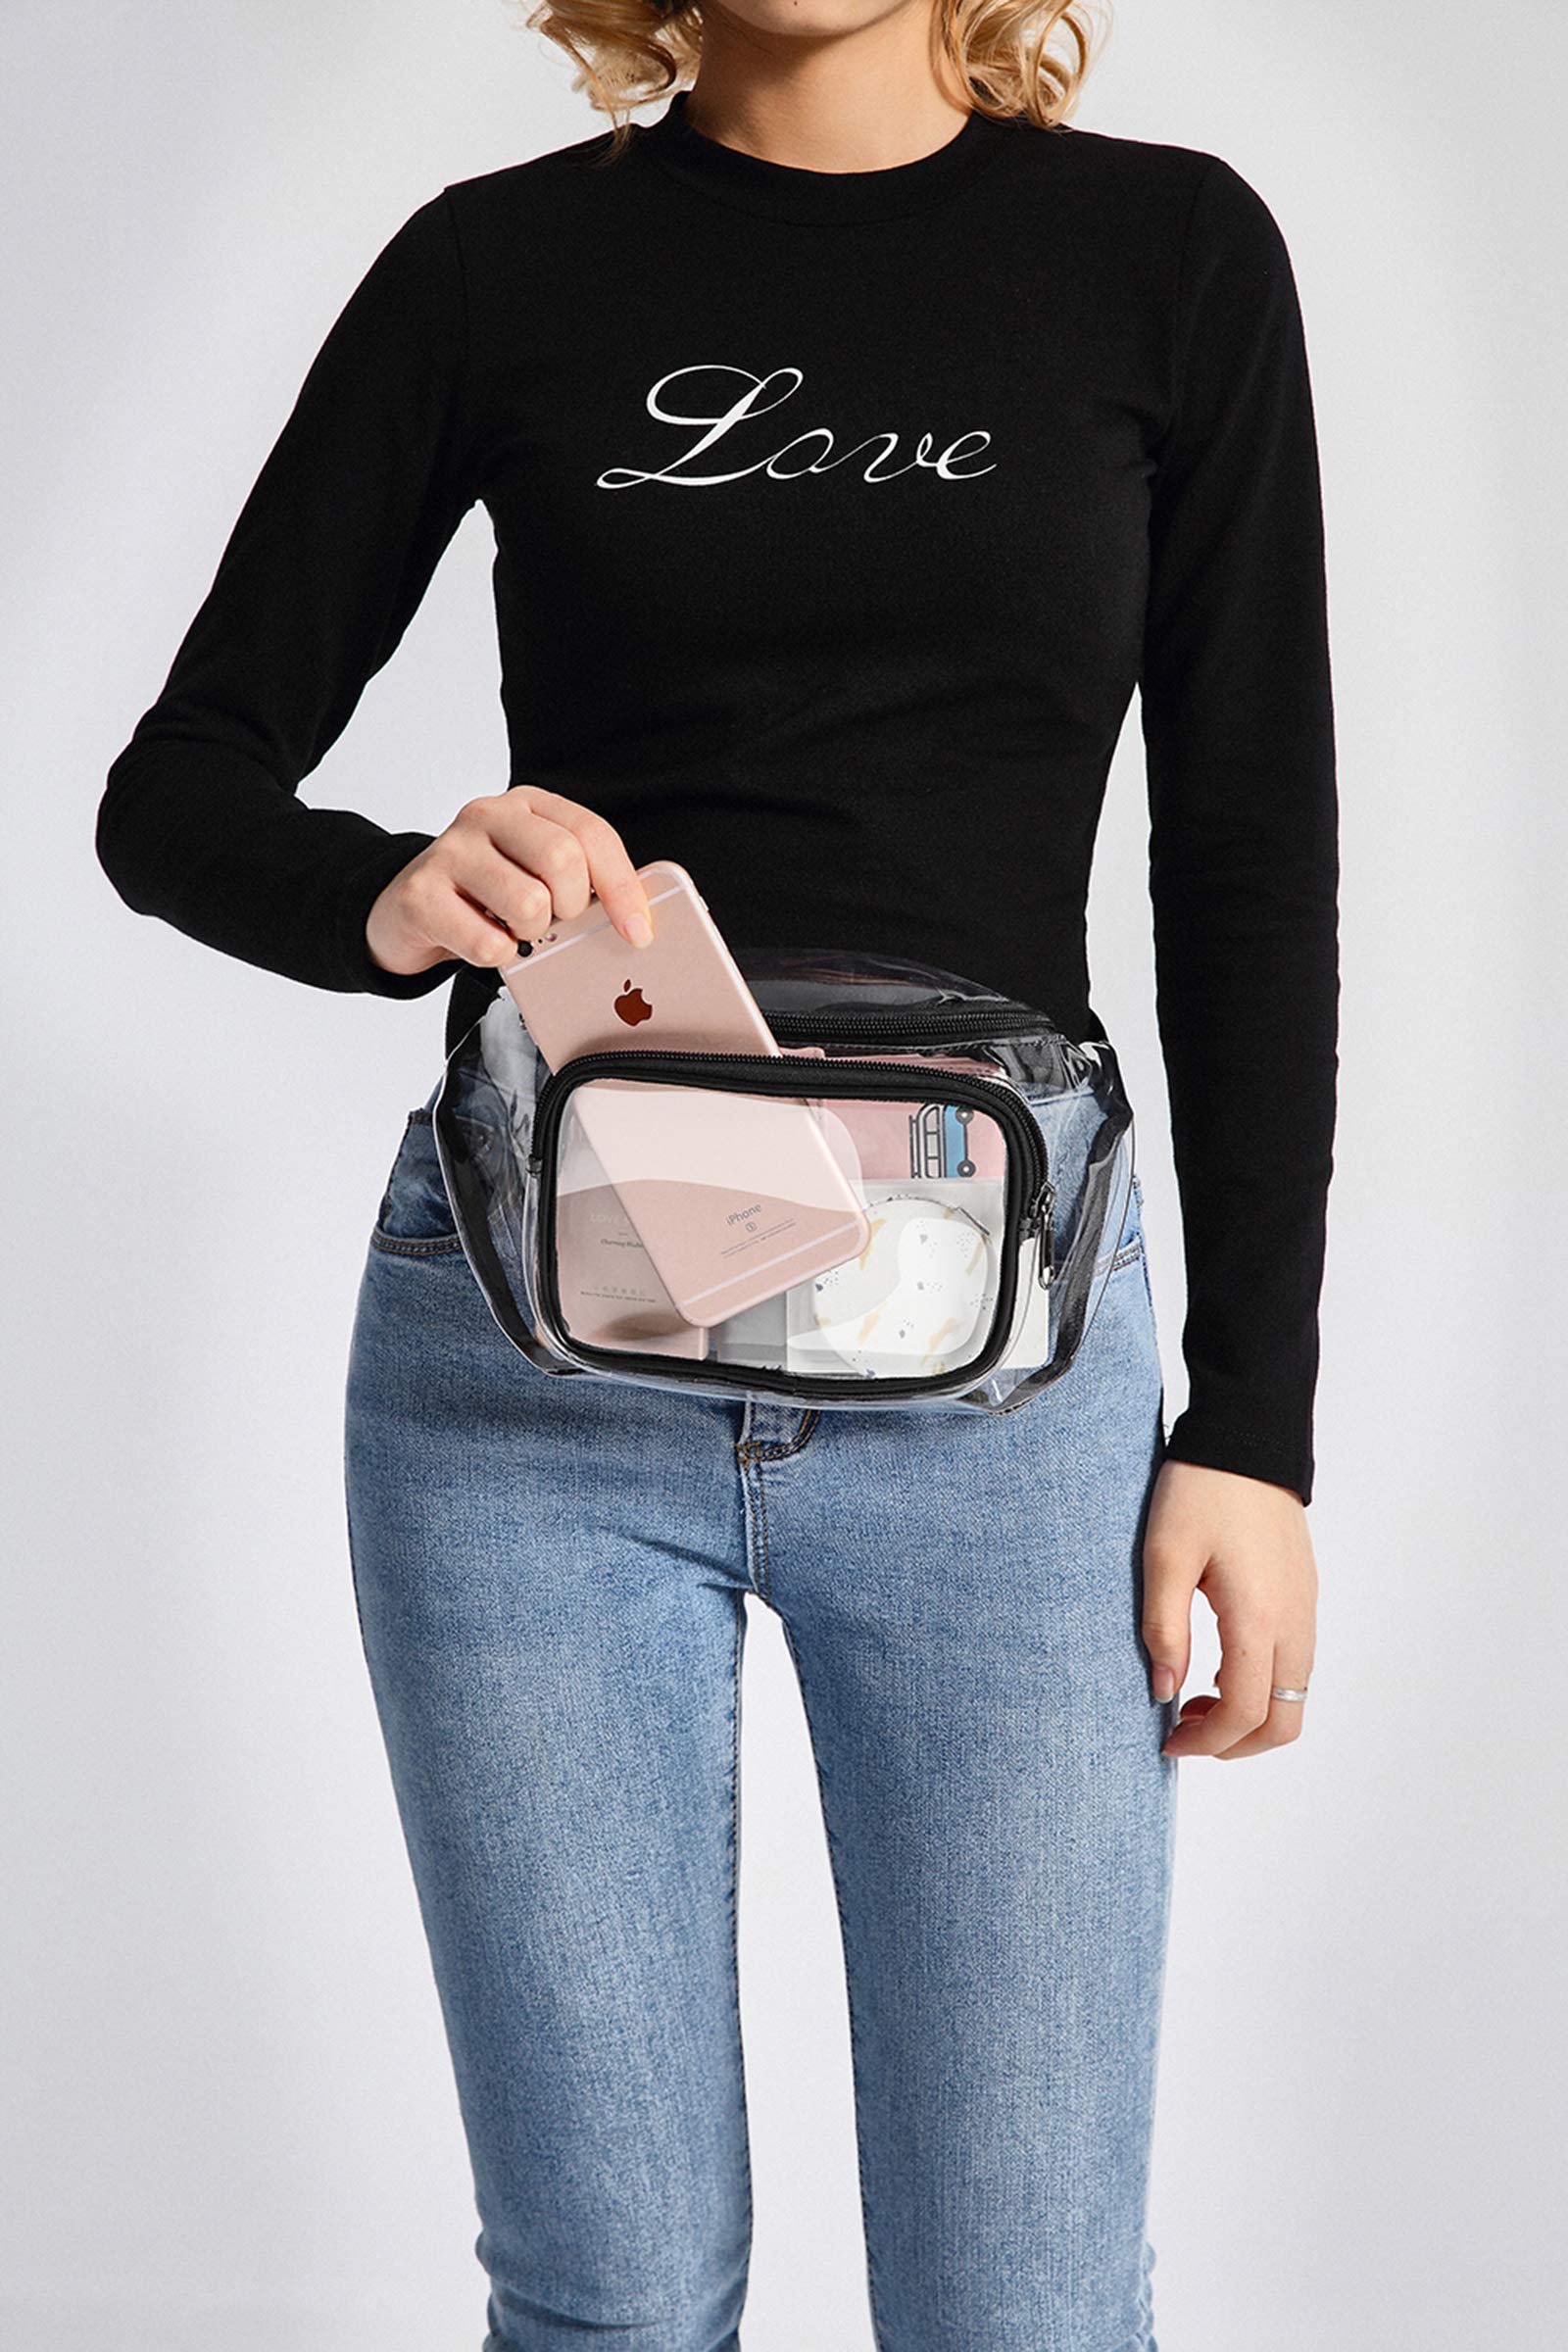 Clear Fanny Pack Stadium Approved - Veckle Fanny Packs for Women Men Water-resistant Cute Waist Bag Clear Purse Transparent Adjustable Belt Bag for Sports, Travel, Beach, Events, Concerts Bag, Black